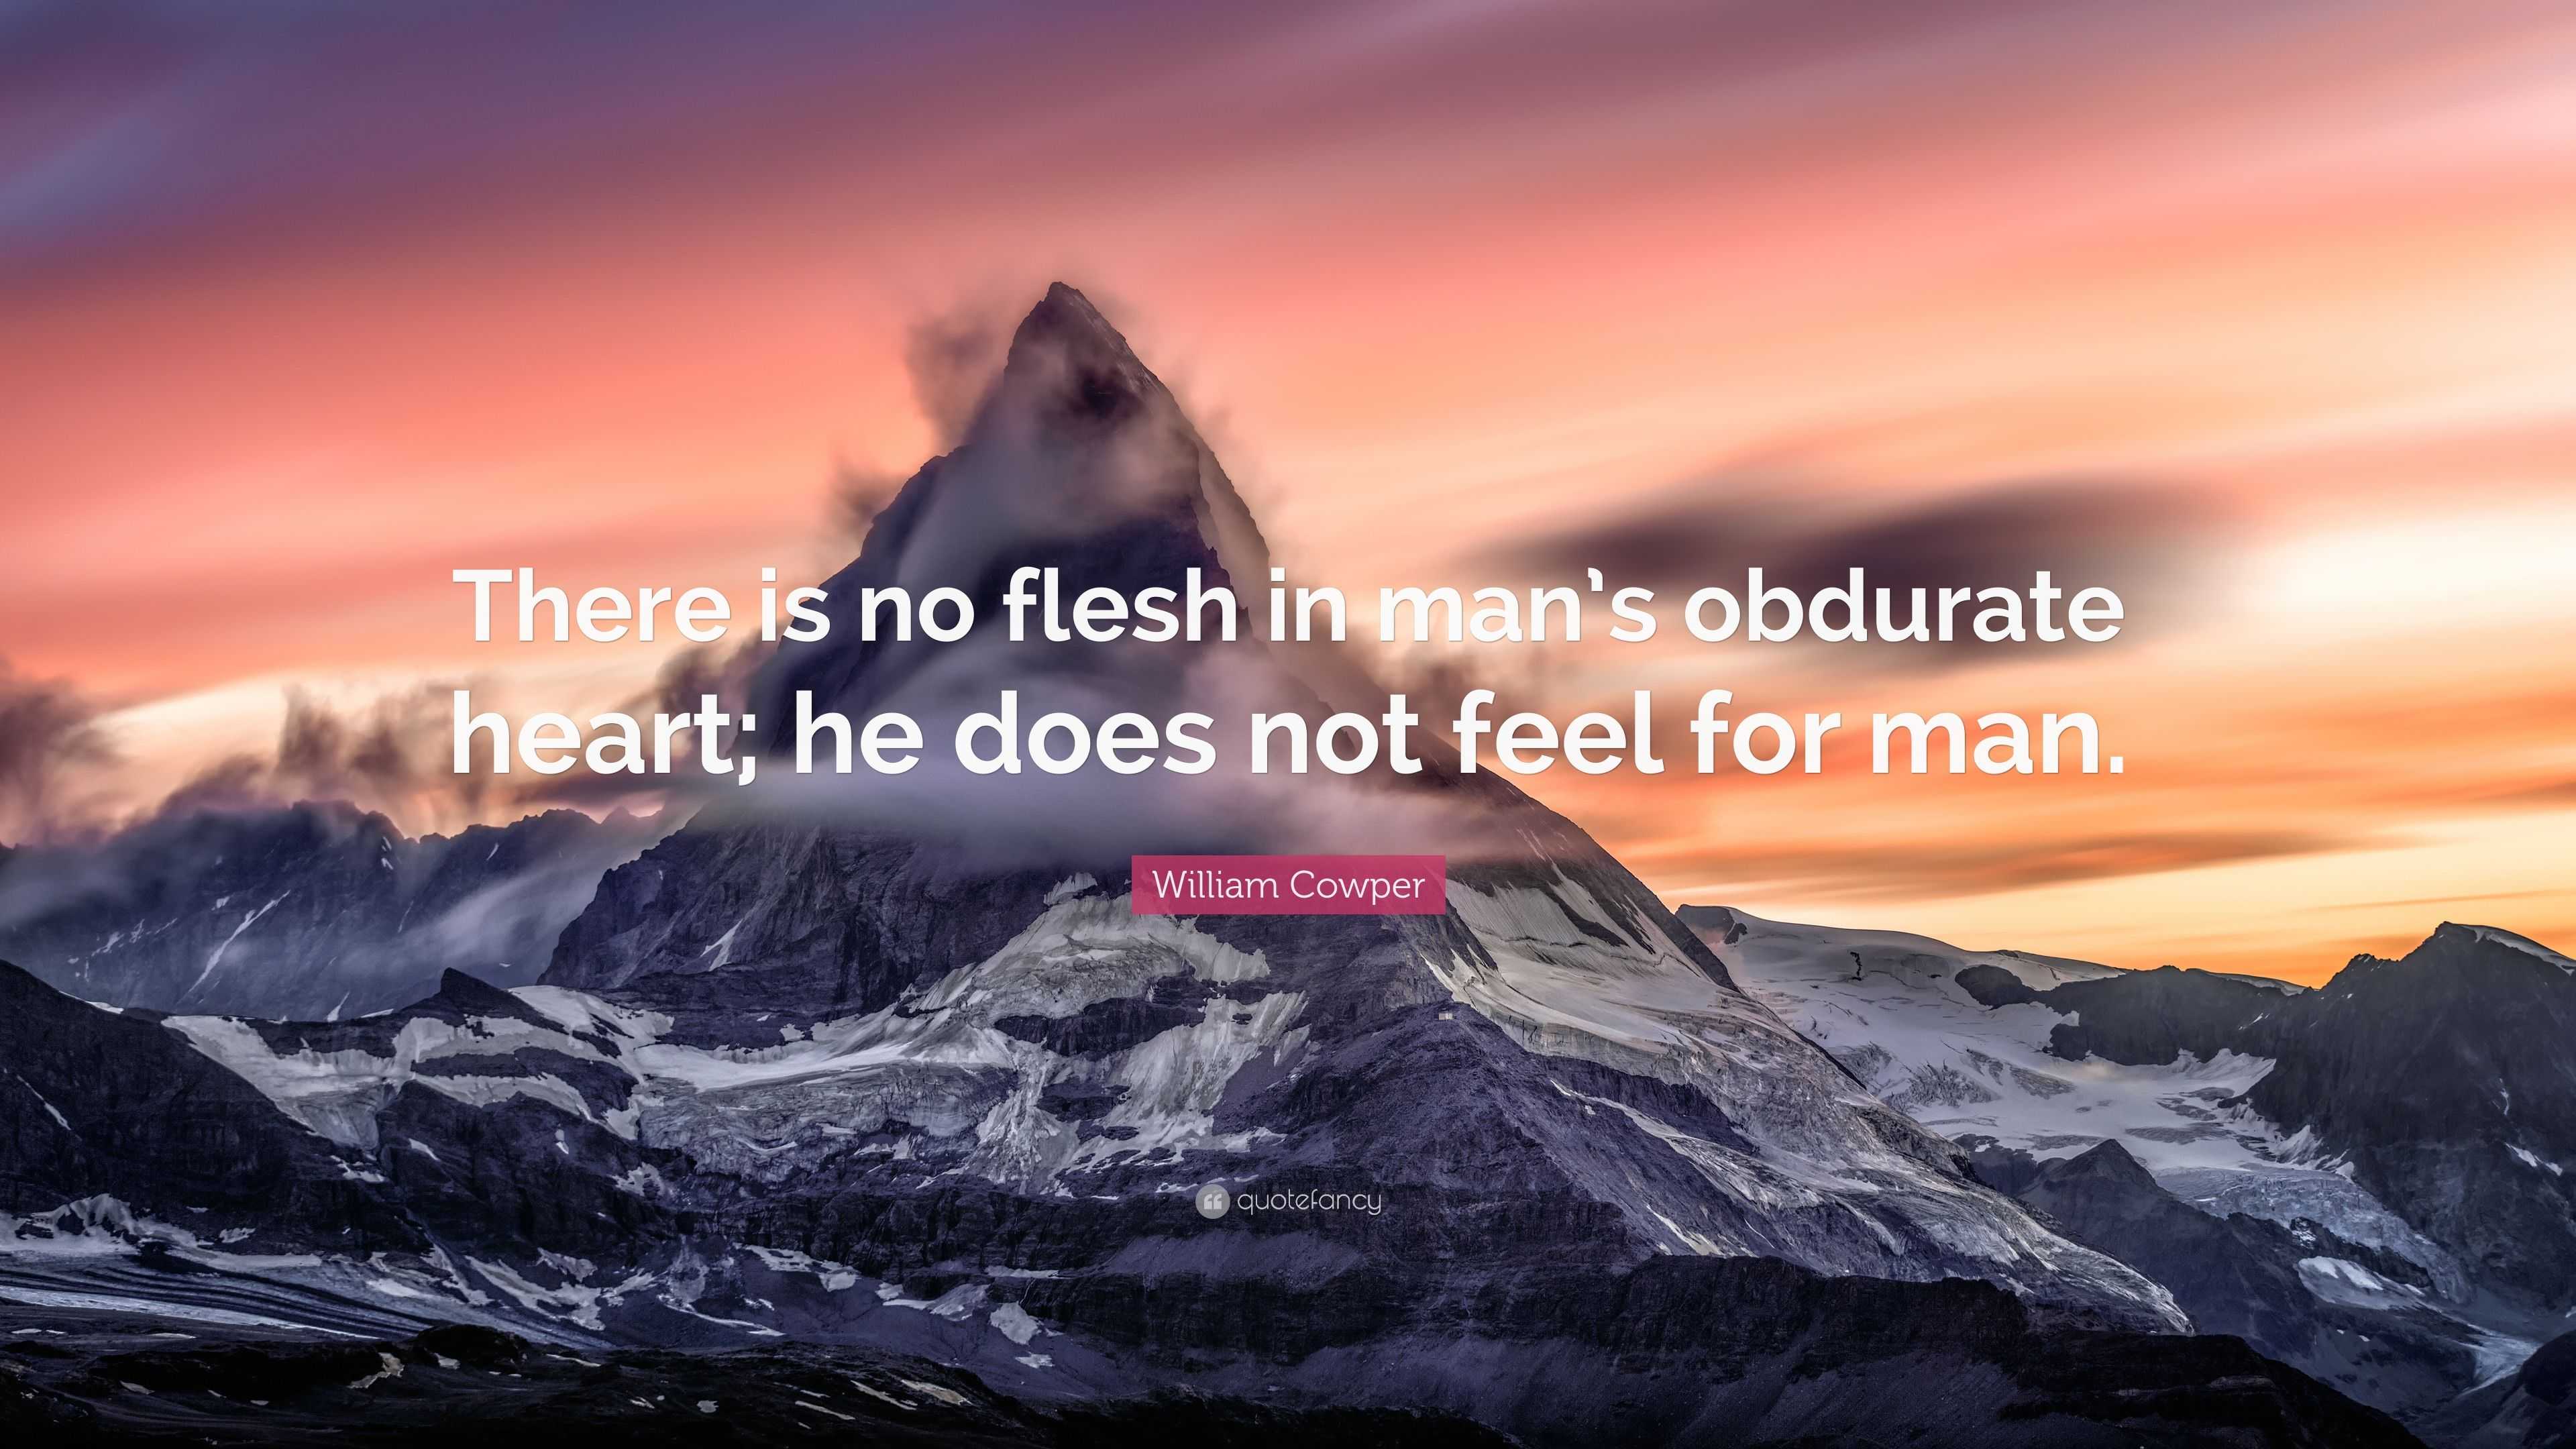 there is no flesh in his obdurate heart